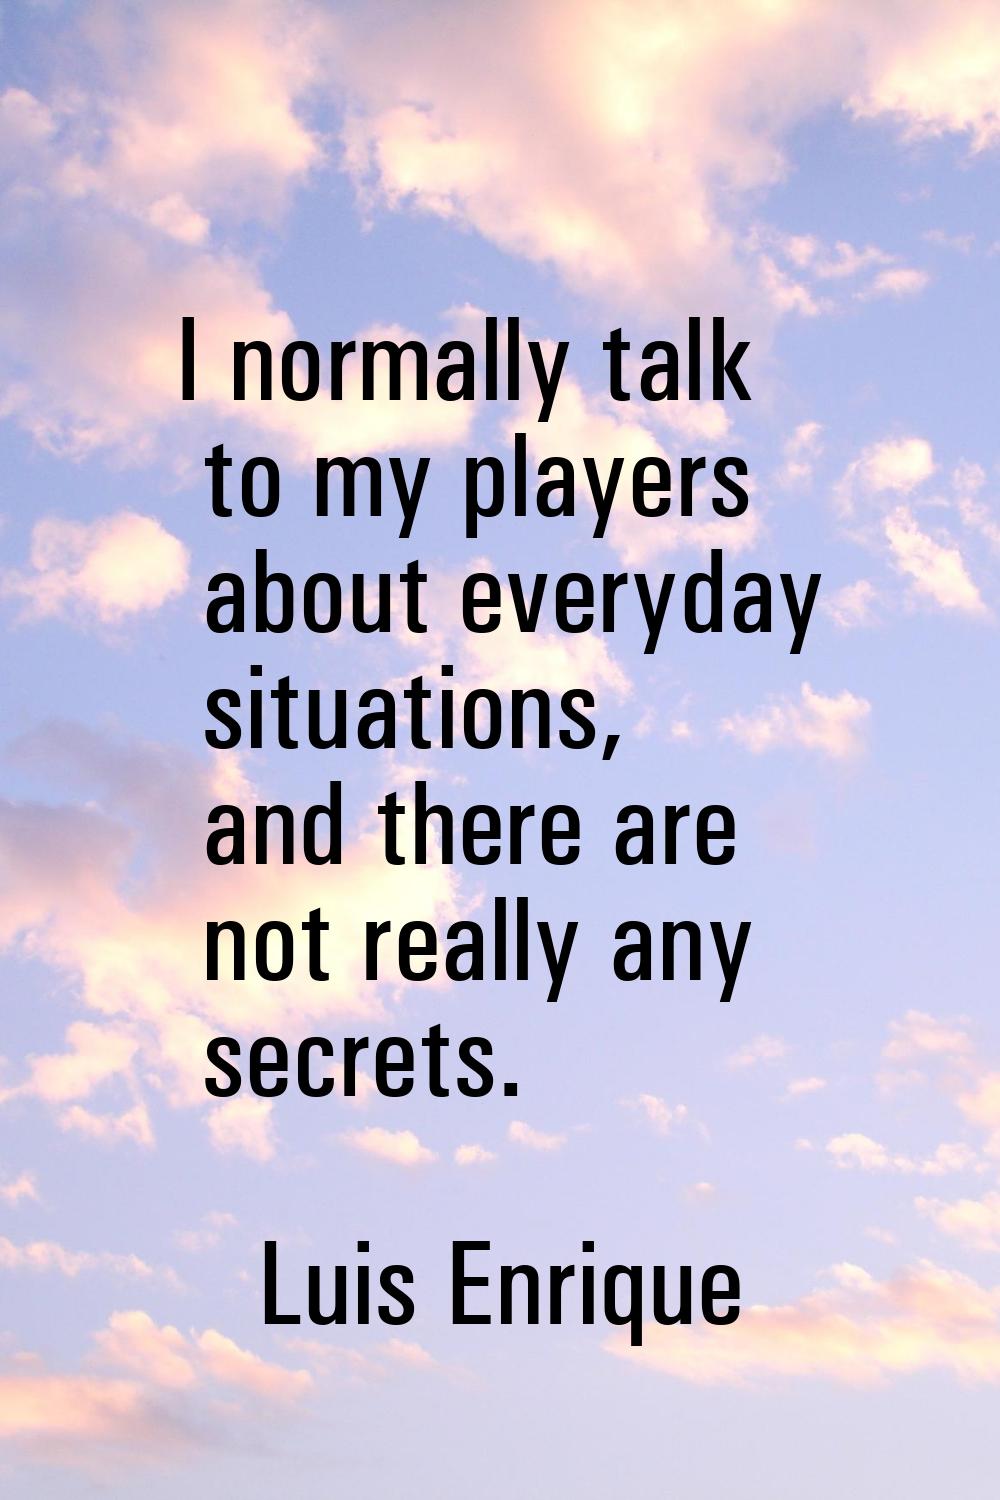 I normally talk to my players about everyday situations, and there are not really any secrets.